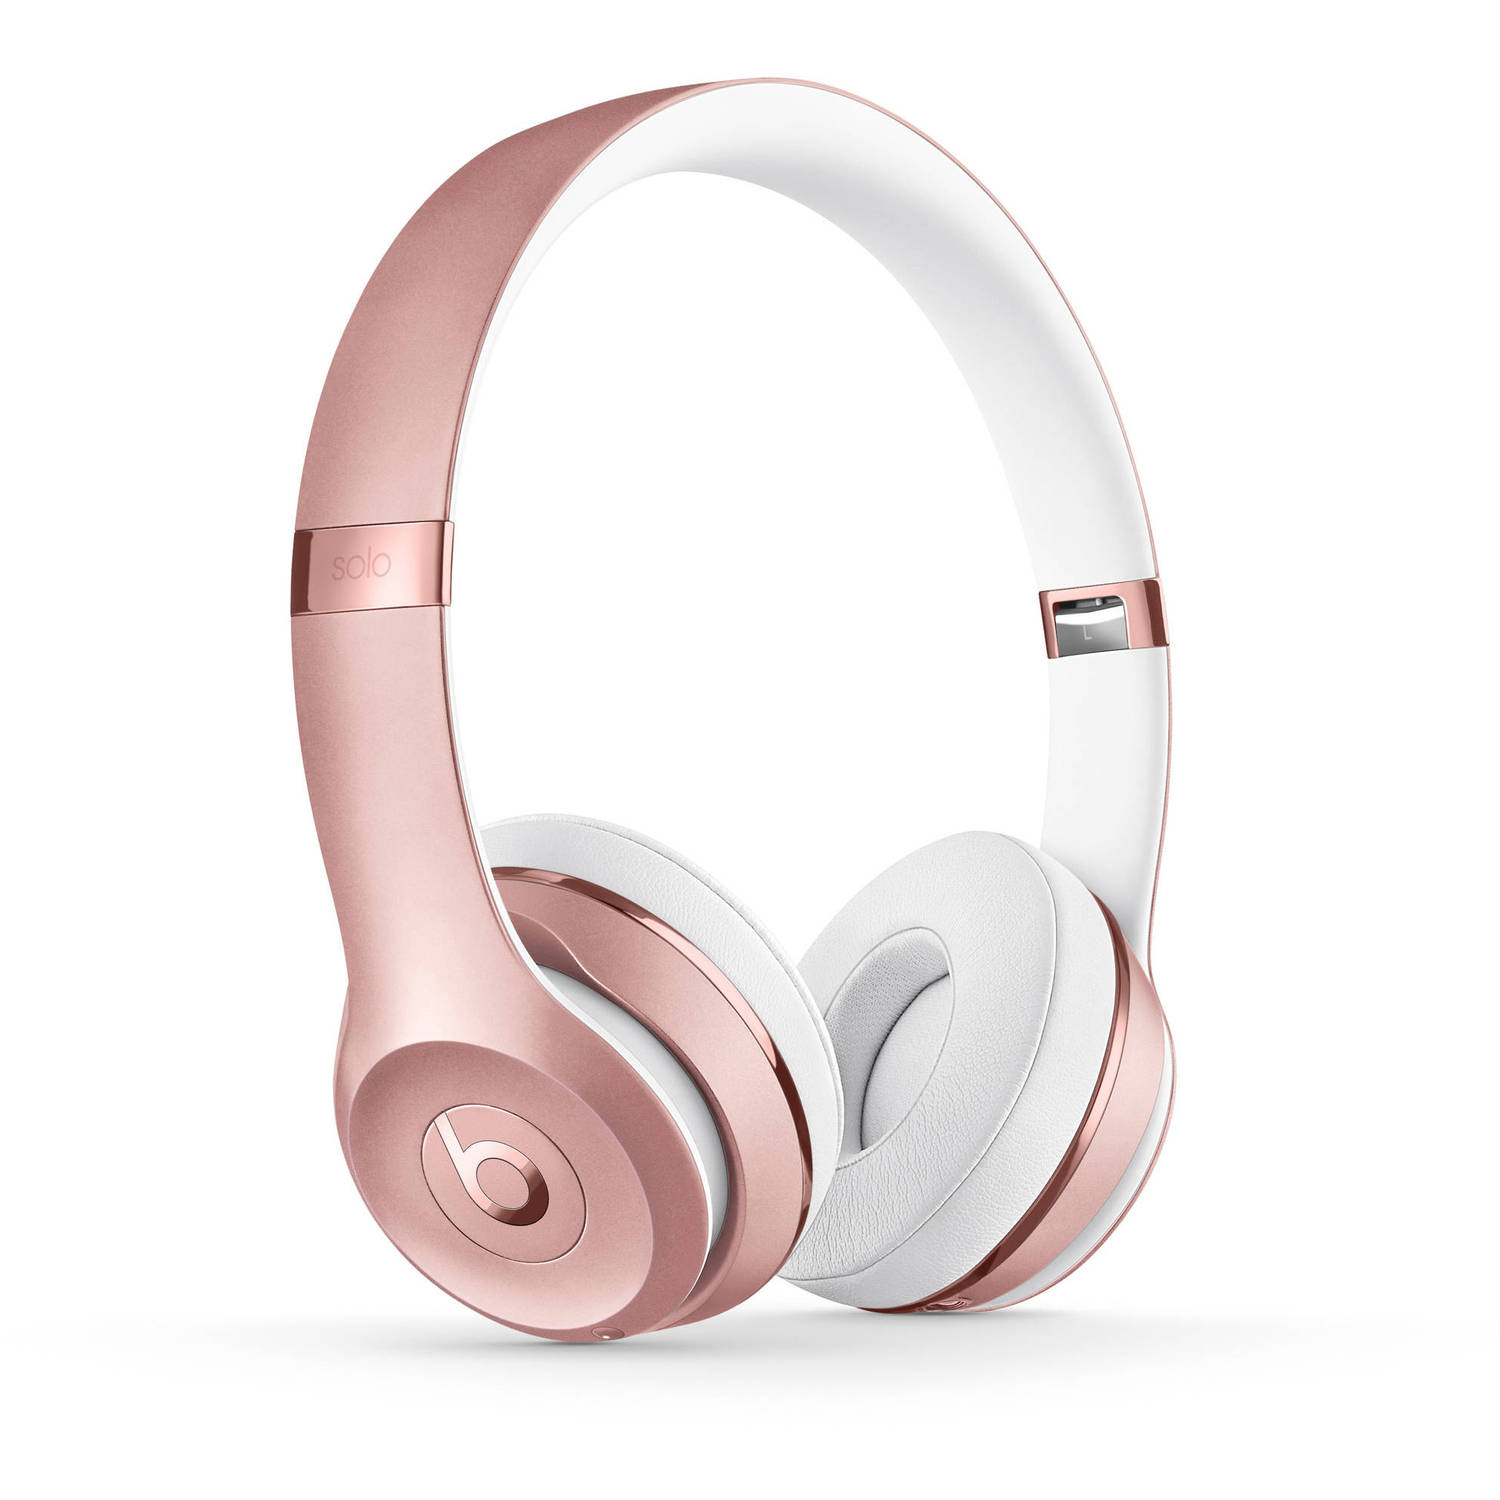 Restored Beats MNET2LL/A Solo3 Wireless On-Ear Headphones - Rose Gold (Refurbished) - image 1 of 6